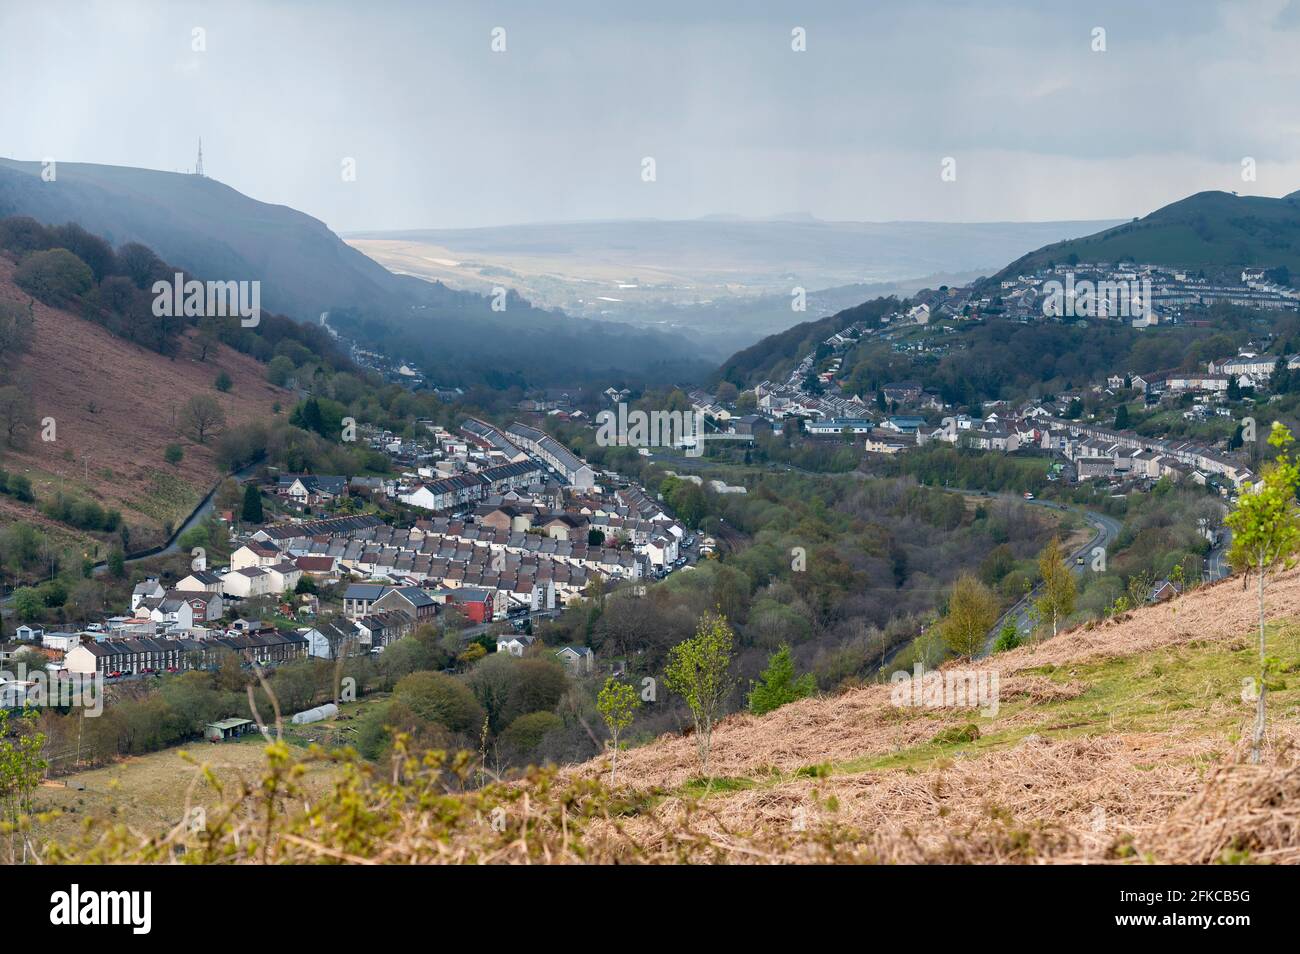 A Bentley Continental GT V8 luxury sports car pictured against a backdrop of the Rhymney Valley in South East Wales. Stock Photo